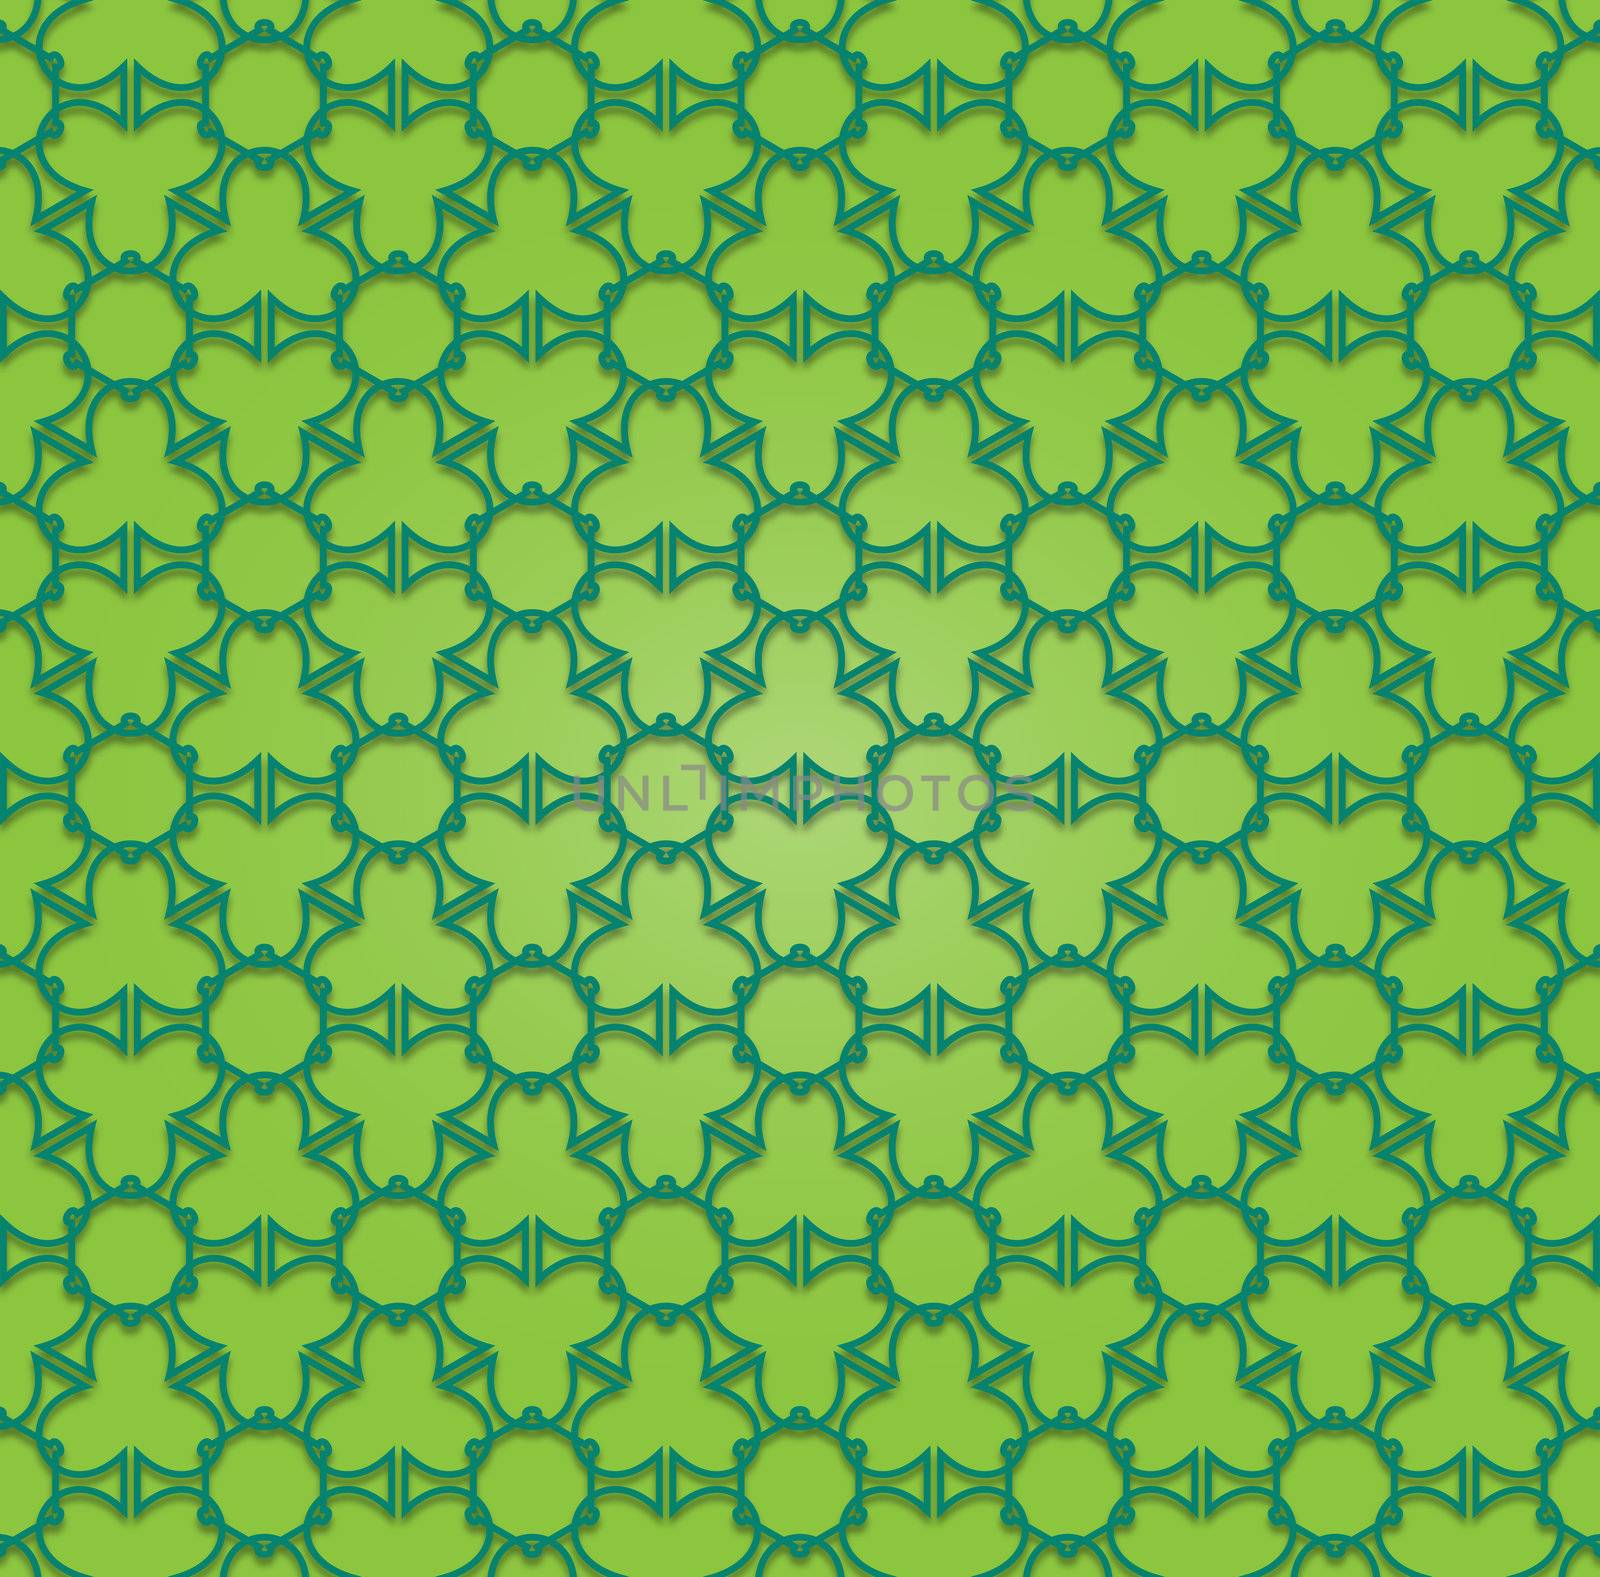 abstract green hexagonal pattern created with crosses